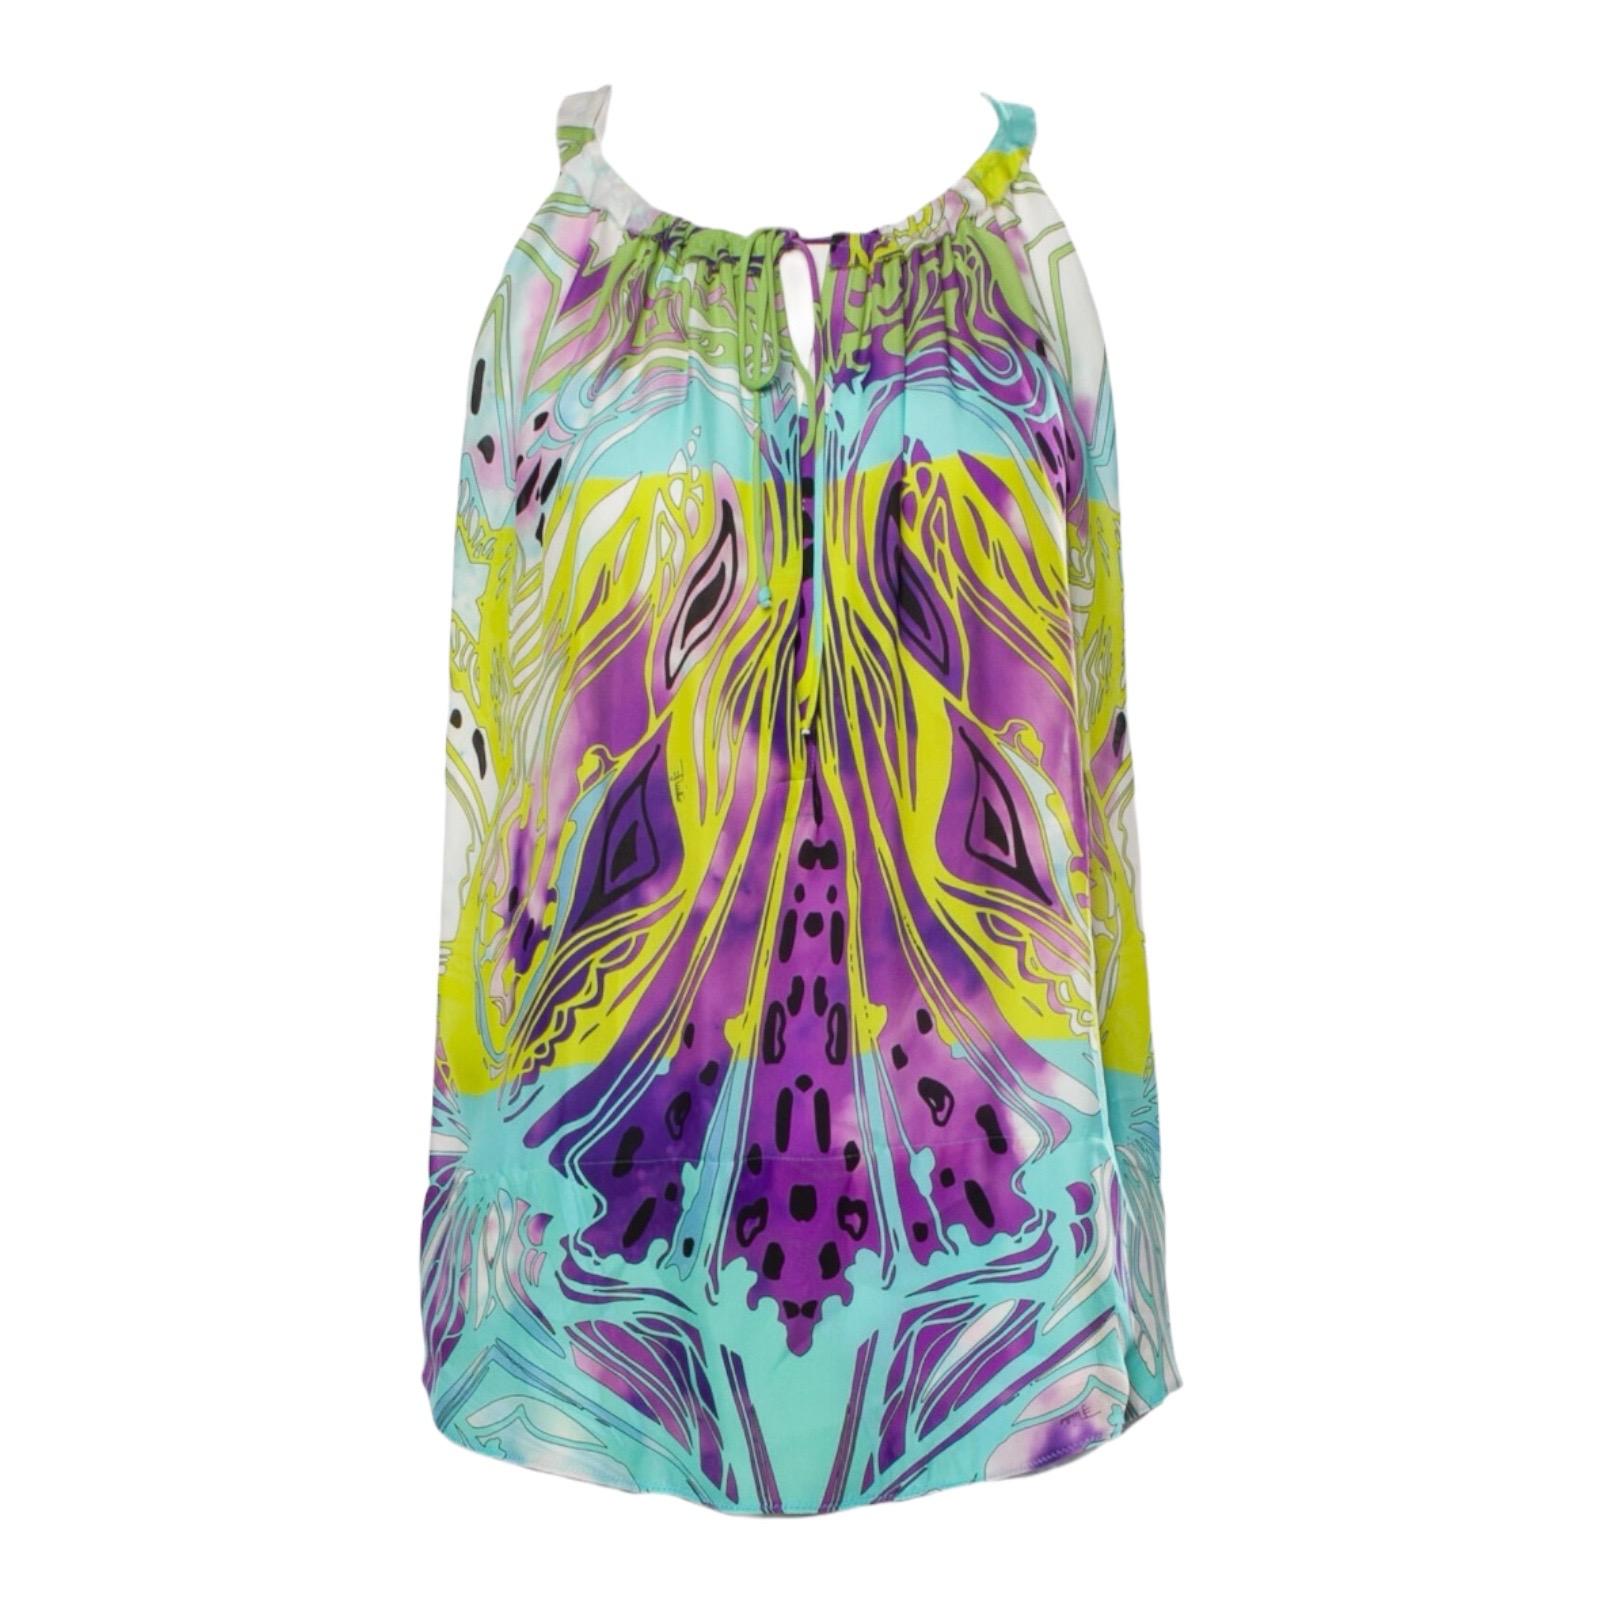 EMILIO PUCCI PASTEL SIGNATURE PRINT DRESS

A timeless EMILIO PUCCI gown that will never go out of style!


Stunning multicolored silk top designed by Peter Dundas for Emilio Pucci.

Crafted from silk-chiffon, it's drenched in gorgeous shades of